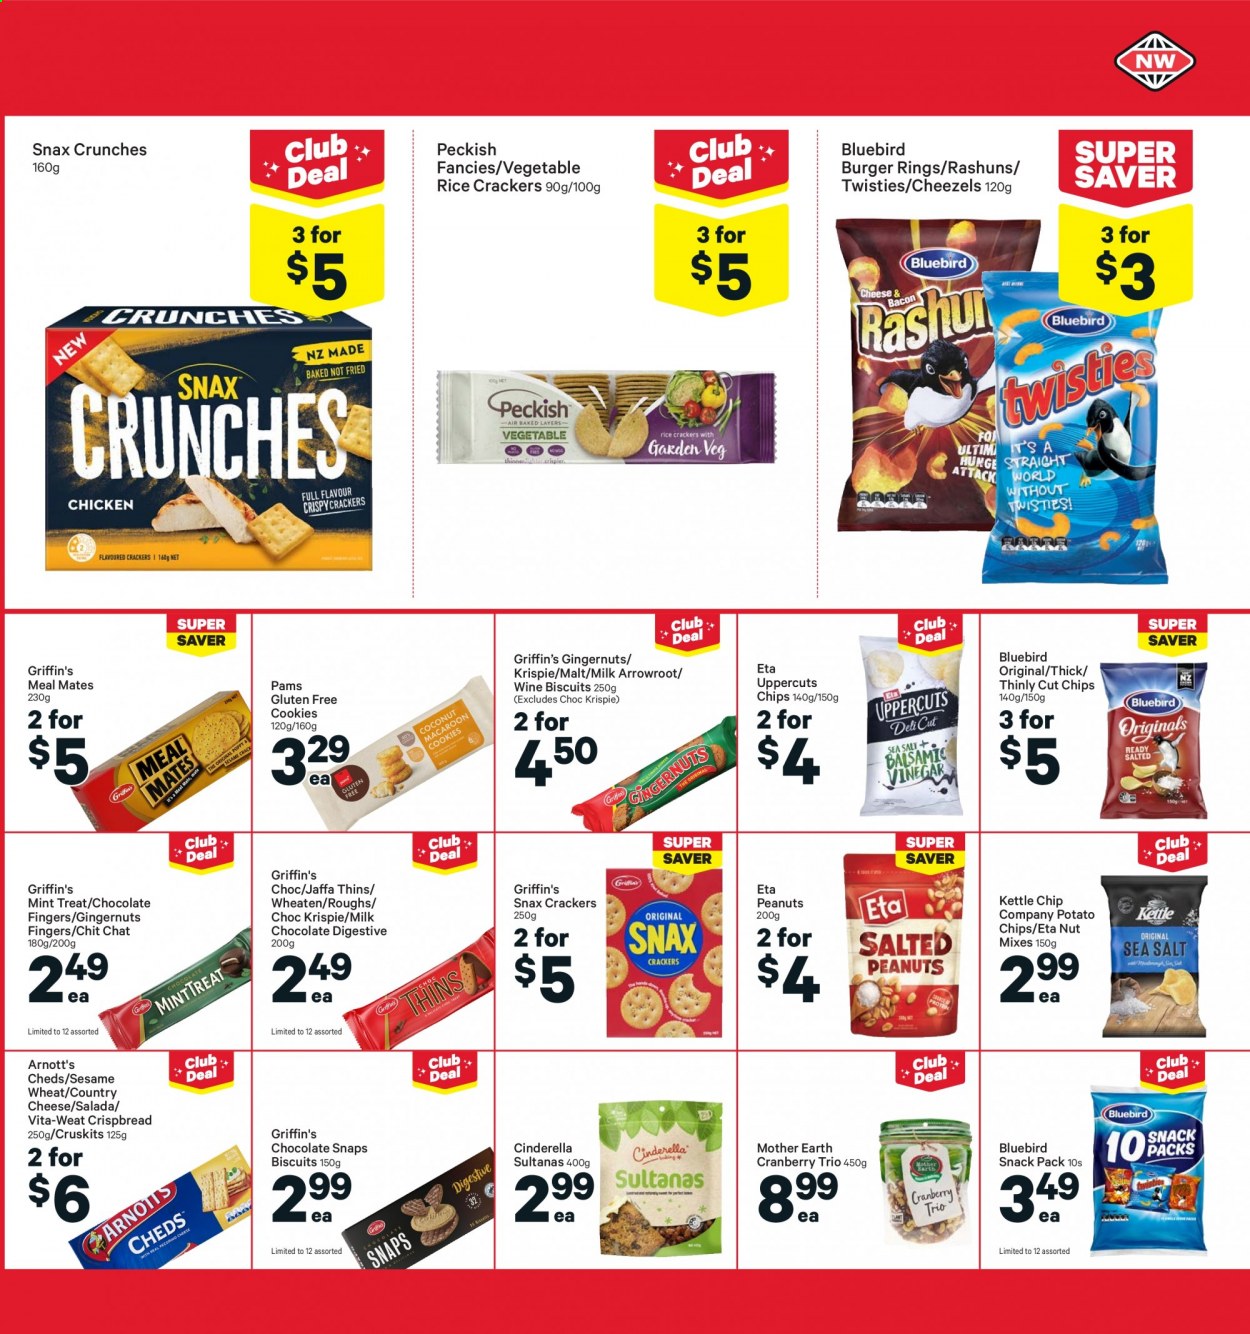 thumbnail - New World mailer - 02.08.2021 - 08.08.2021 - Sales products - crispbread, hamburger, cheese, cookies, milk chocolate, chocolate, crackers, biscuit, Griffin's, Mother Earth, Digestive, potato chips, Thins, Bluebird, rice crackers, malt, sultanas, peanuts, dried fruit, wine. Page 15.